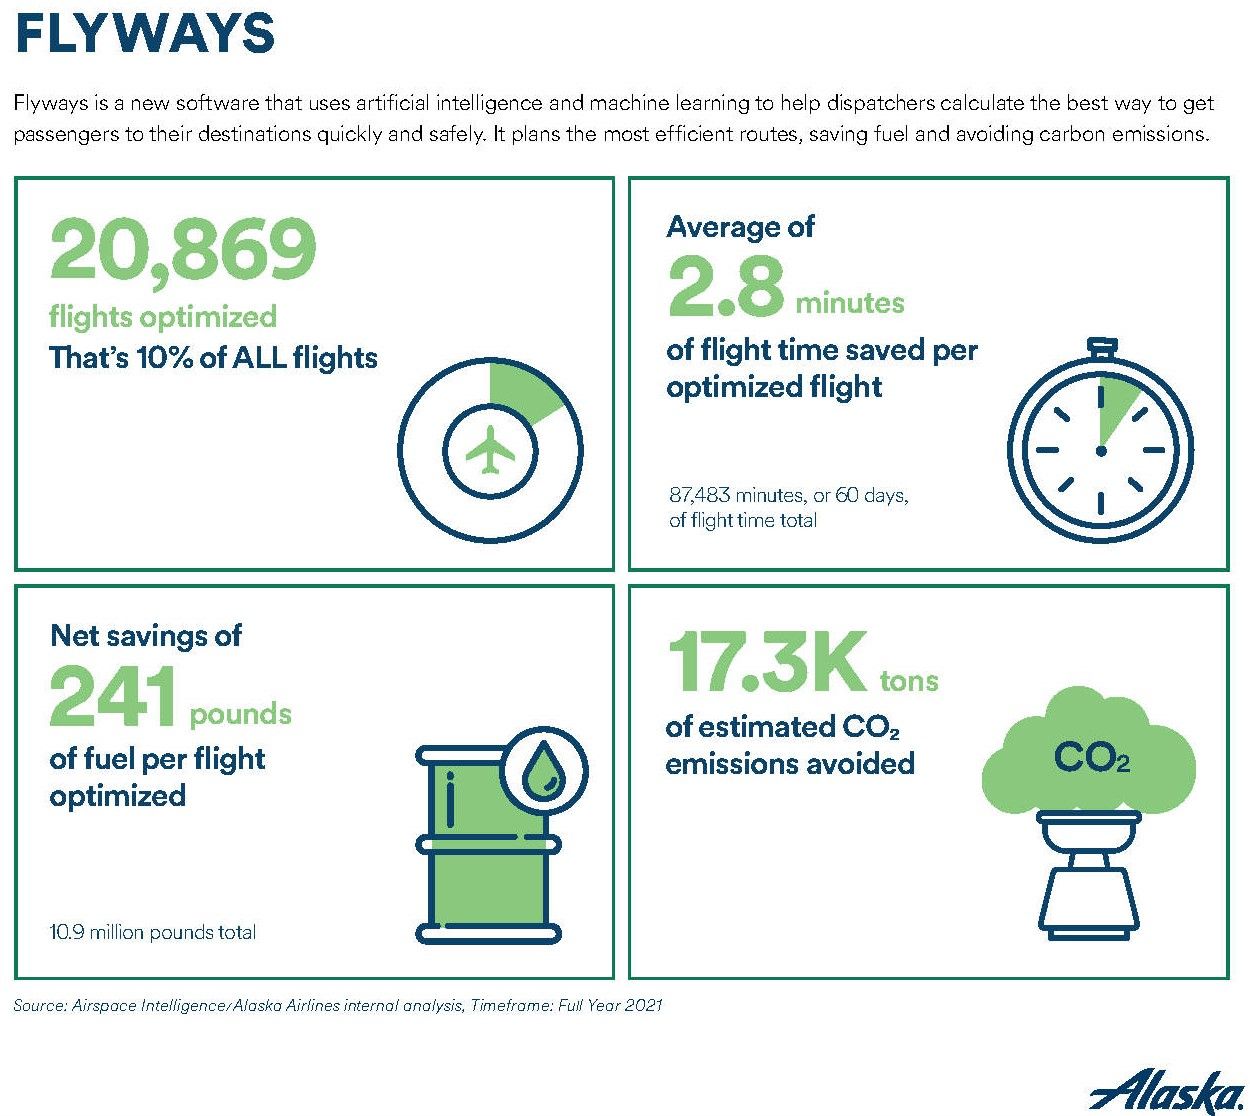 Flyways Infographic in Alaska Airlines 2021 Sustainability Report